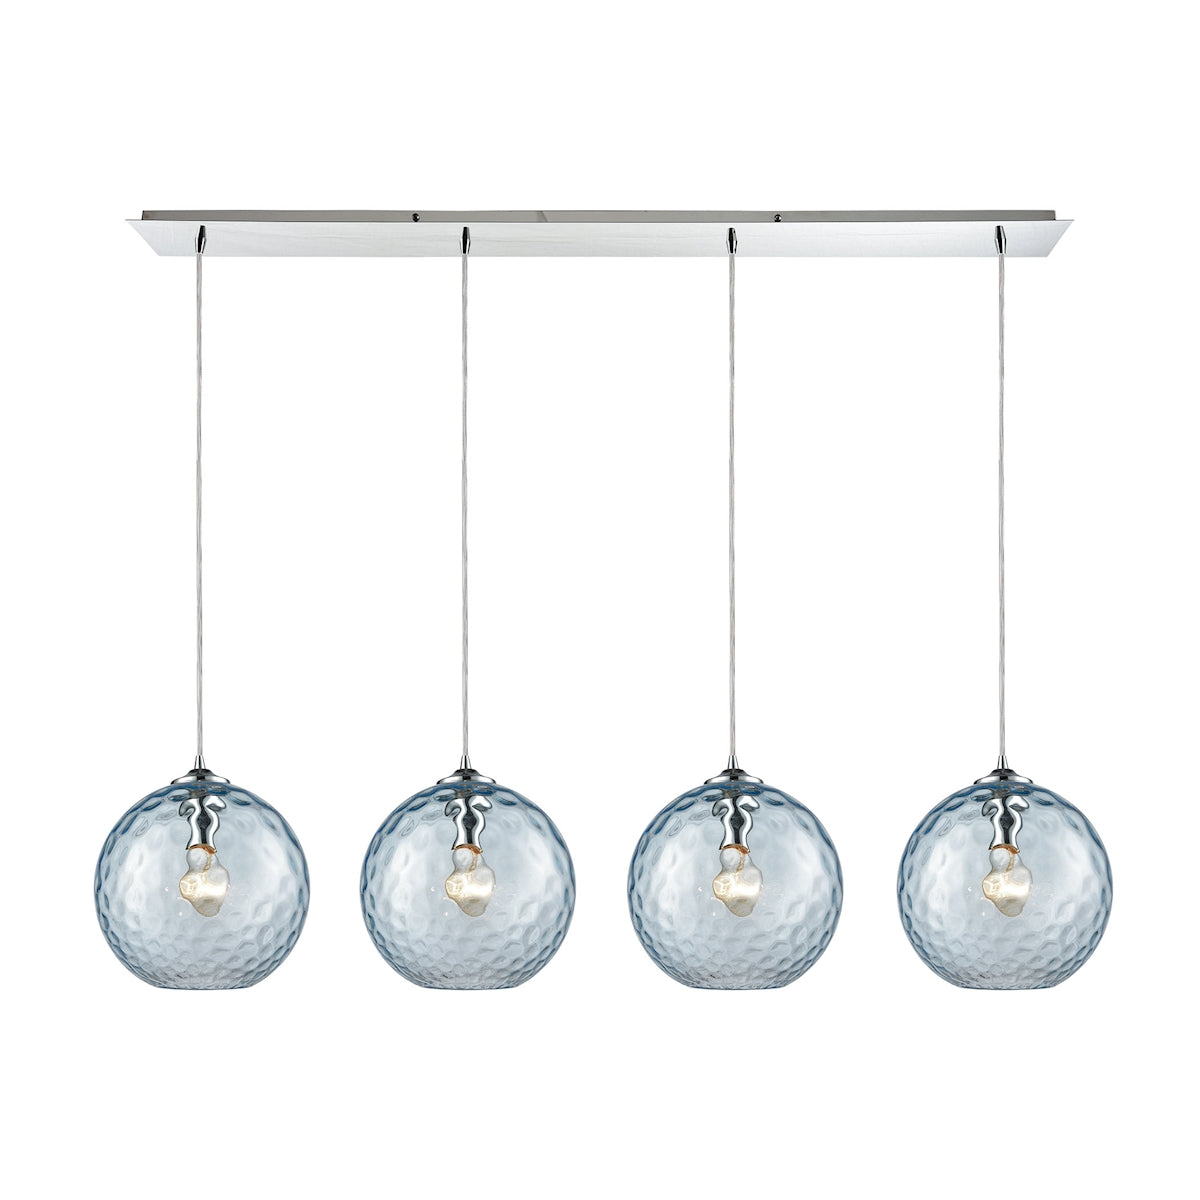 ELK Lighting 31380/4LP-AQ - Watersphere 46" Wide 4-Light Linear Pendant Fixture in Chrome with Hamme